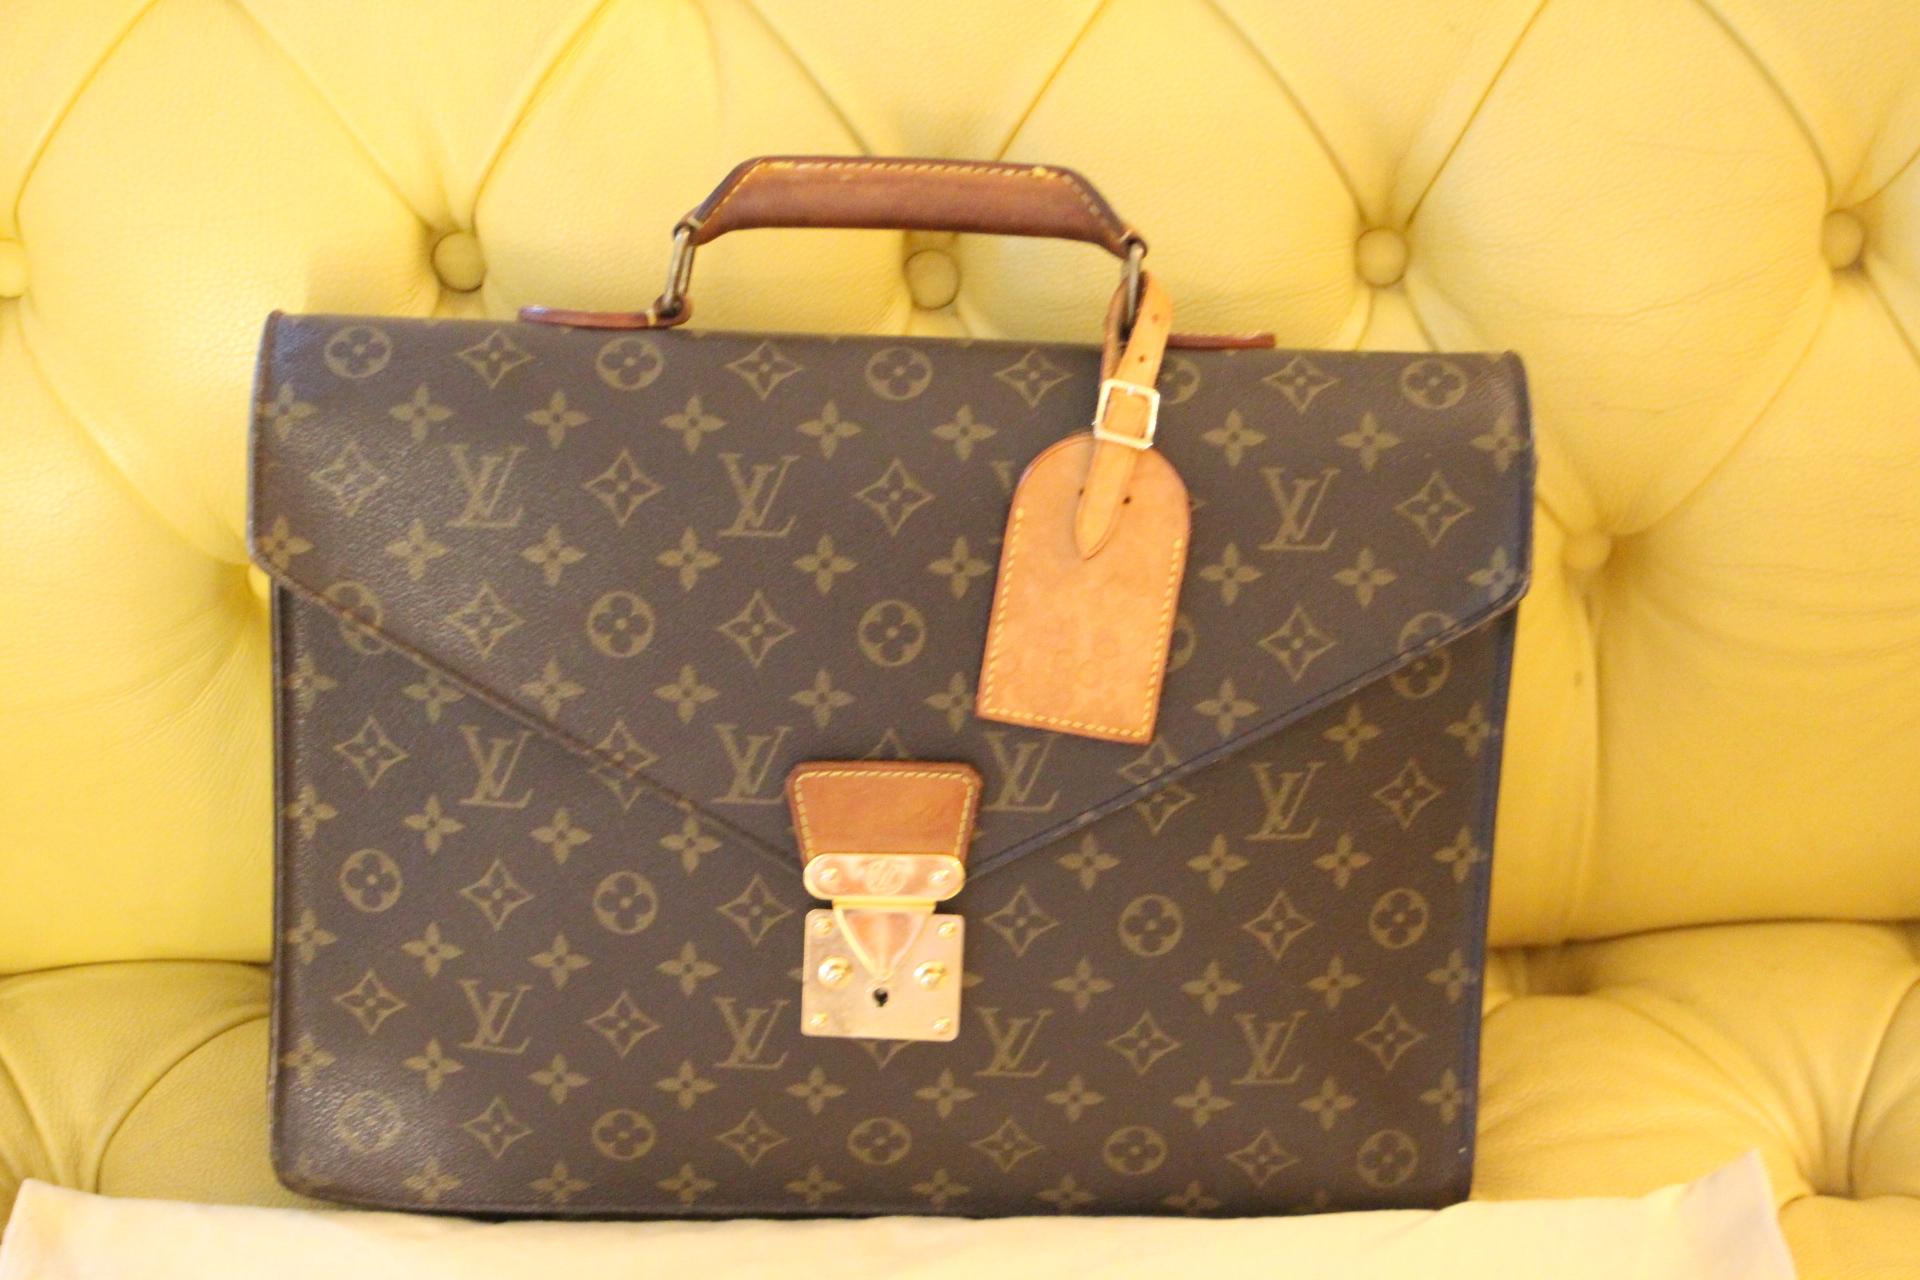 Louis Vuitton Briefcases and Business Bags For Sale at 1stdibs 5 lv attache case, attache case louis vuitton, briefcase